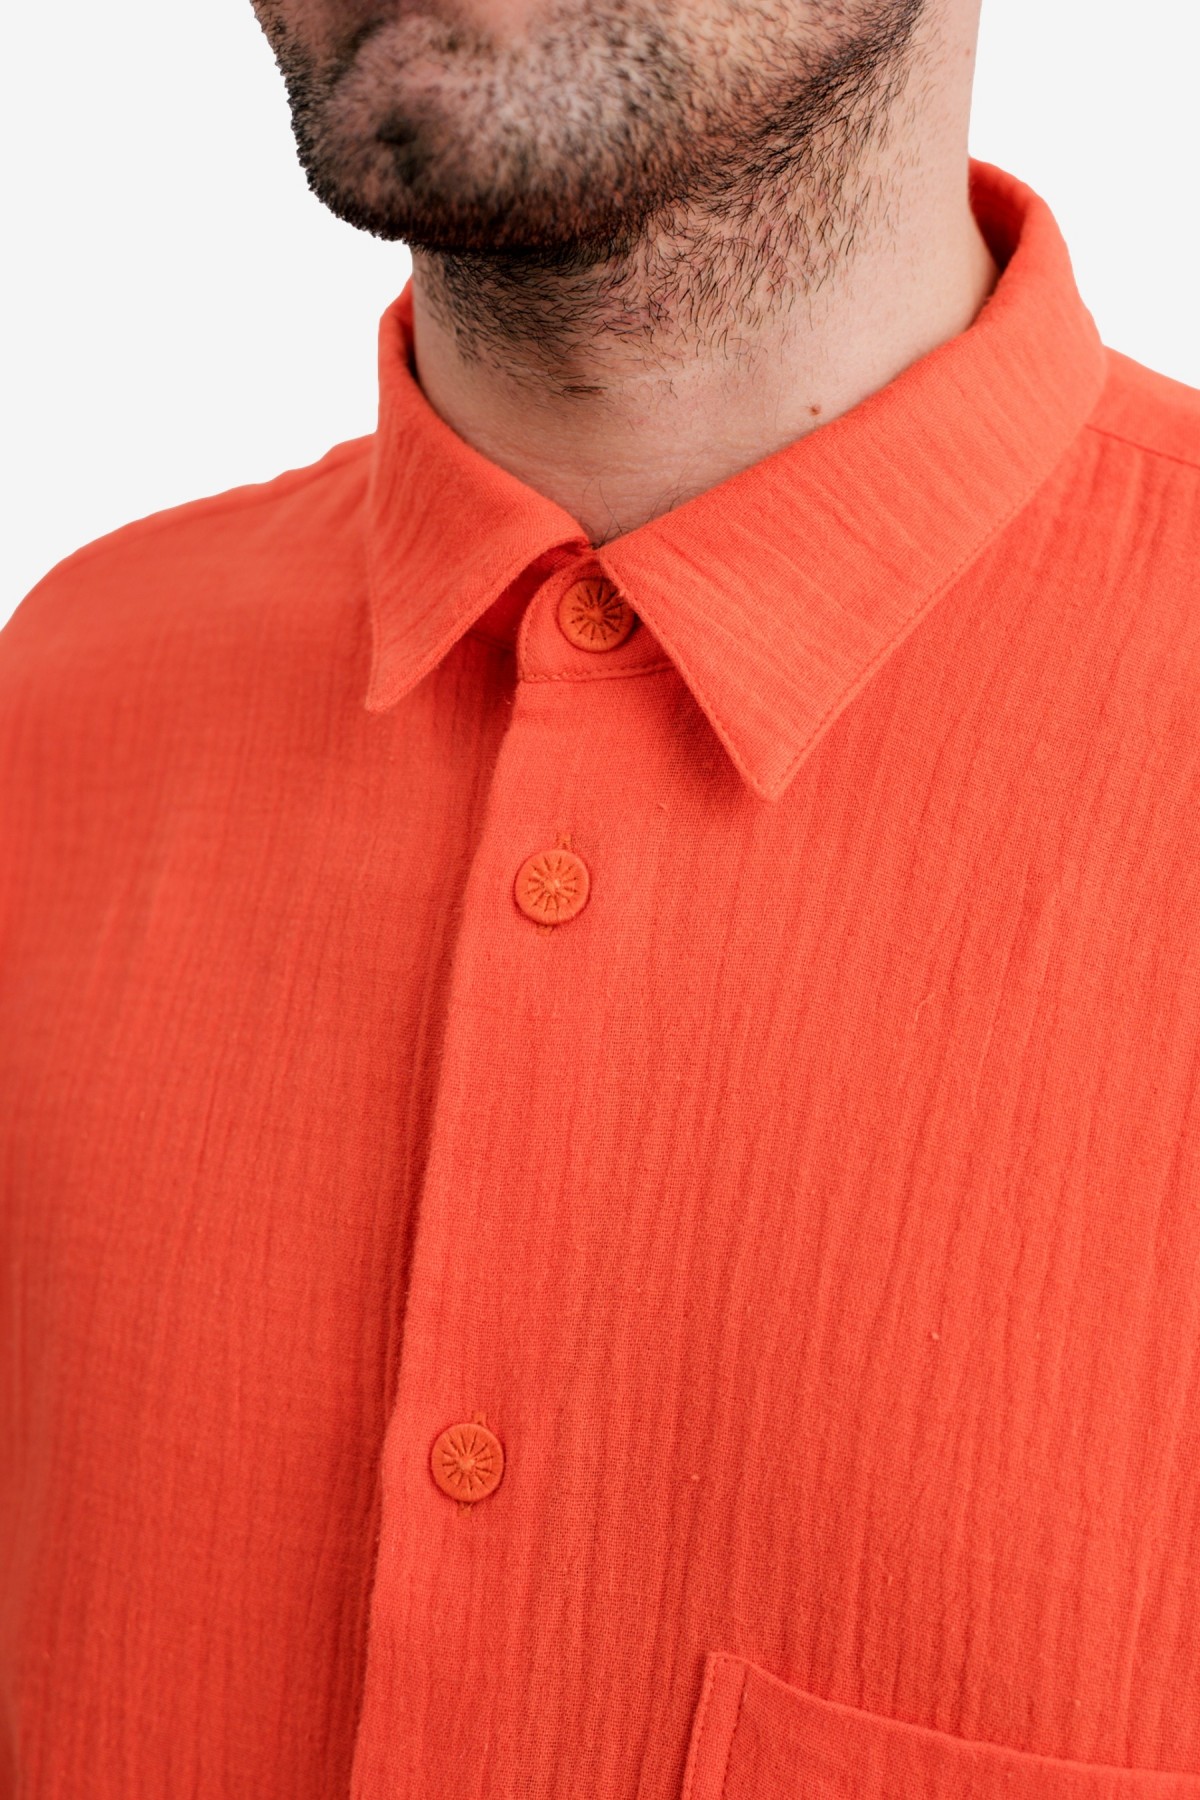 A Kind of Guise Gusto Shirt in Tomato